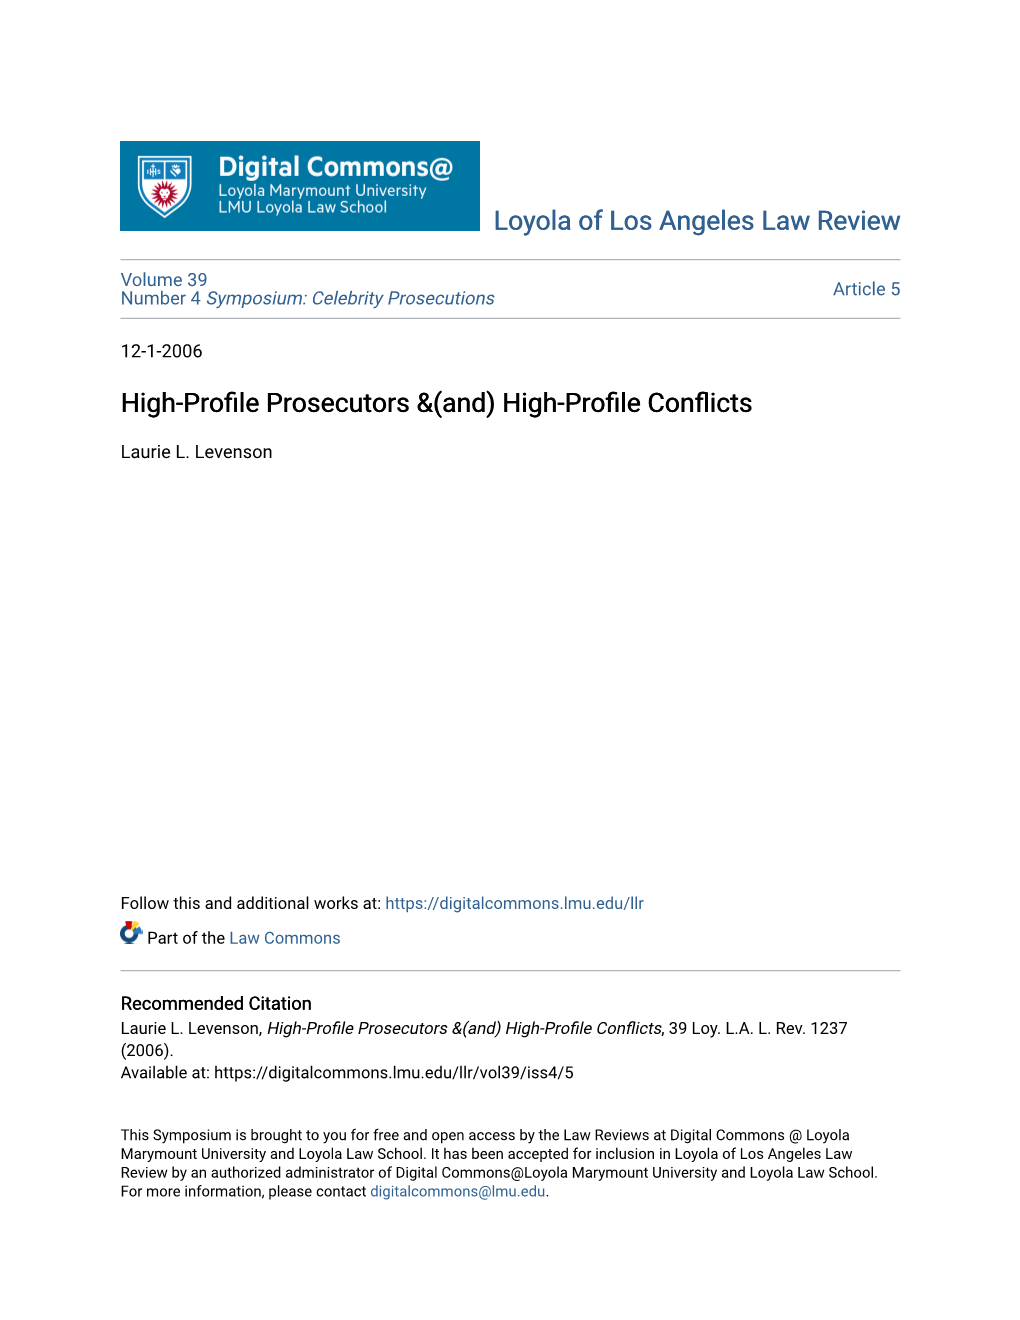 High-Profile Prosecutors &(And) High-Profile Conflicts